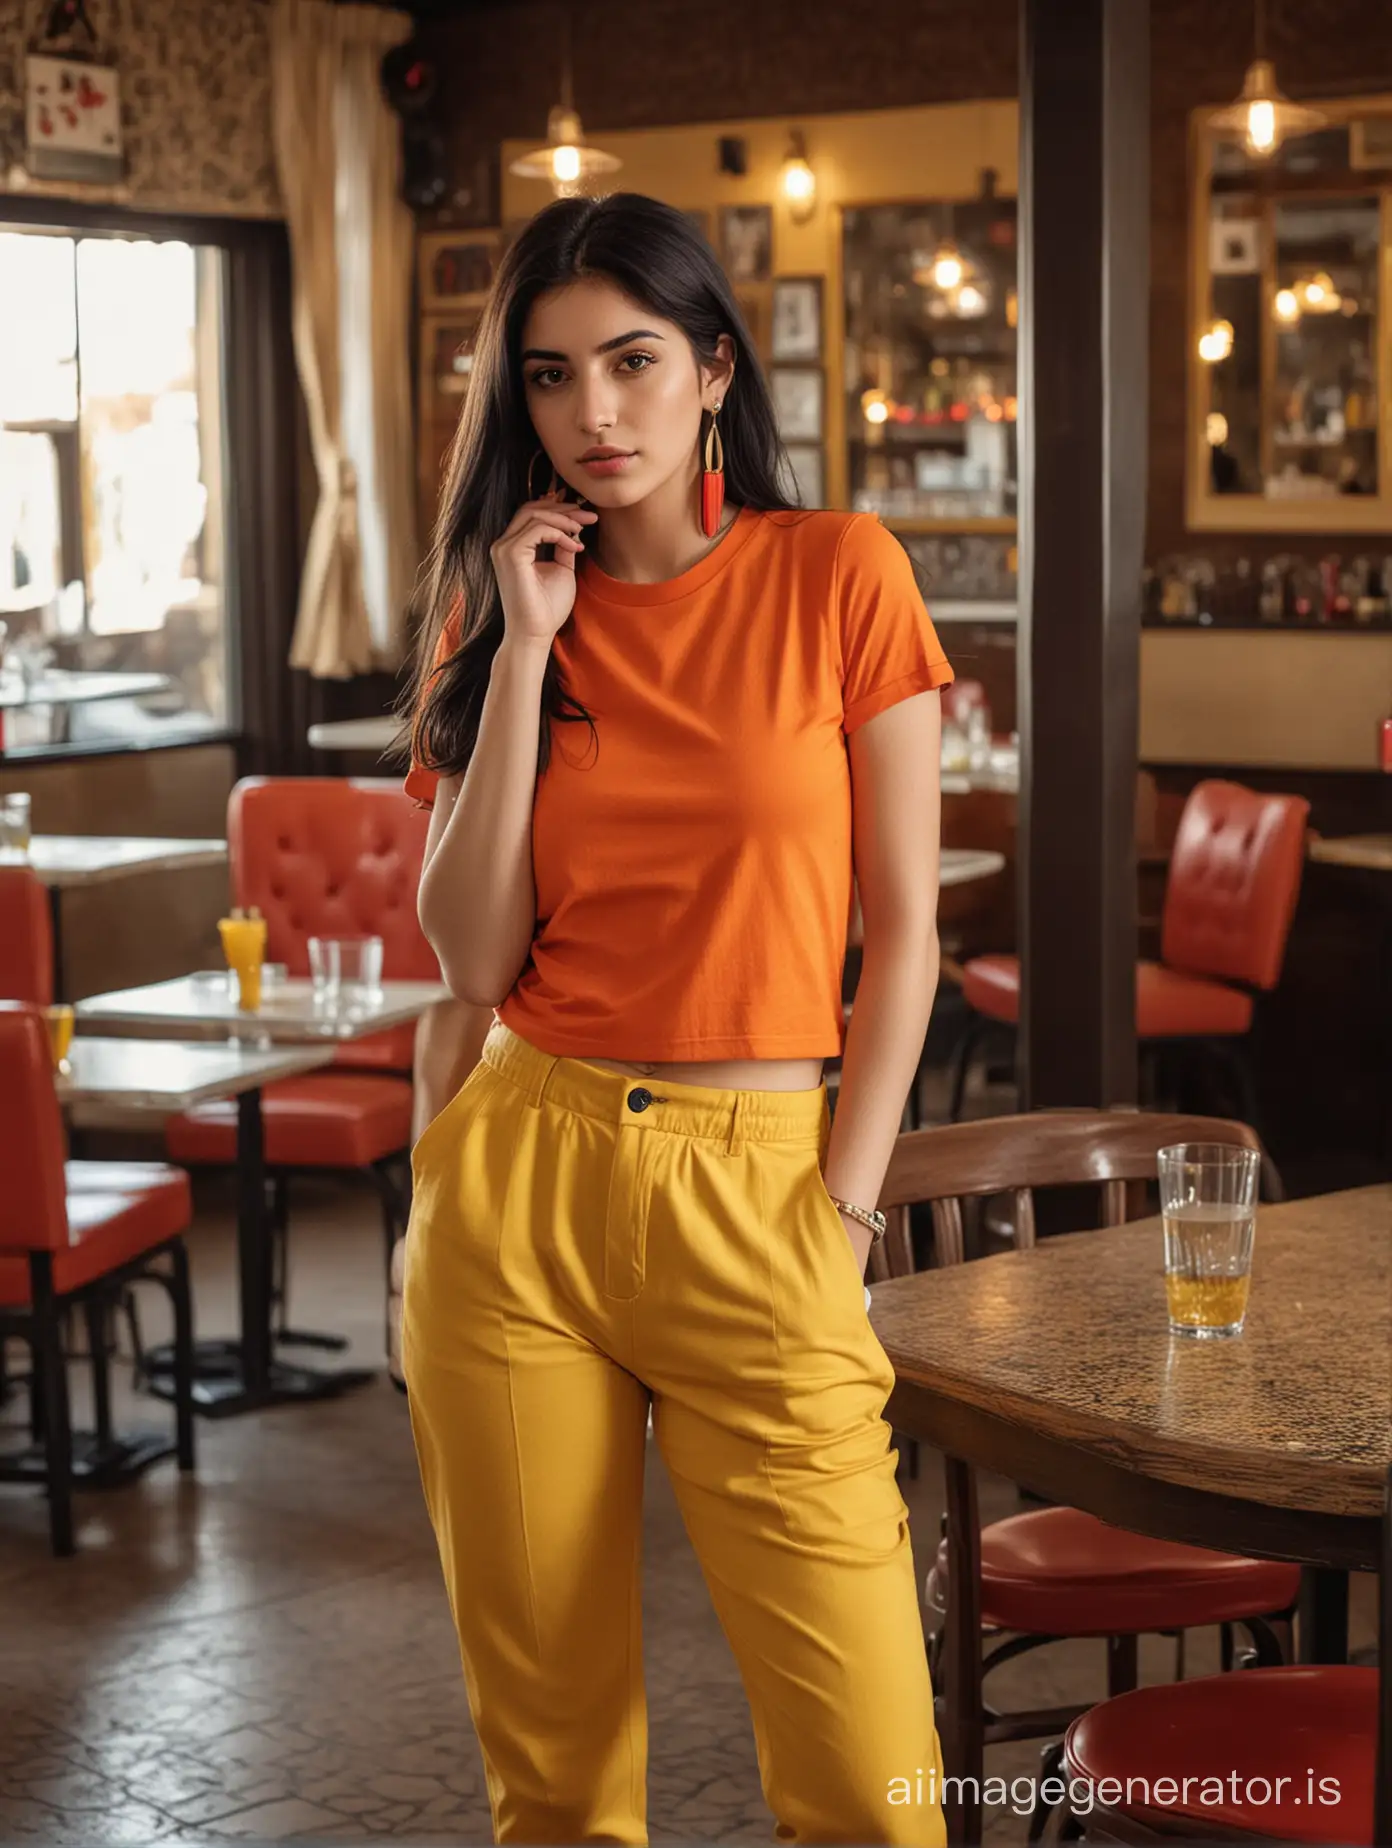 iranian woman 20 years old, orange T shirt, yellow pants, white sneakers, red earrings, black hair, standing in the middle of a vintage restaurant ,full body shot, dramatic light